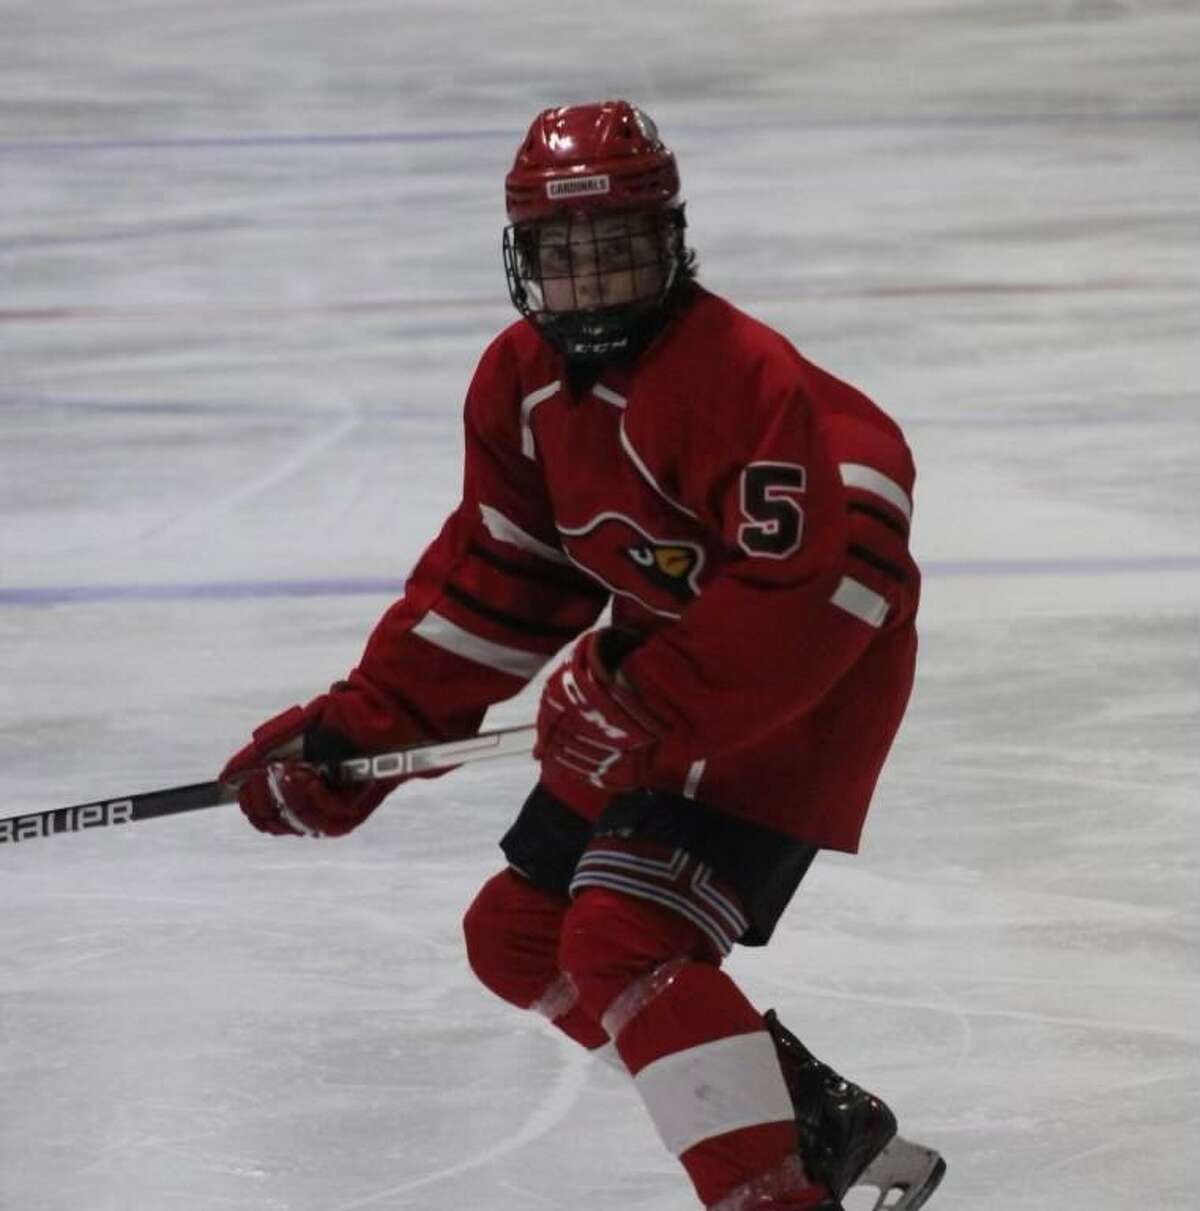 Brady Lisjak playing hockey after his right leg was lengthened 2.5 inches.